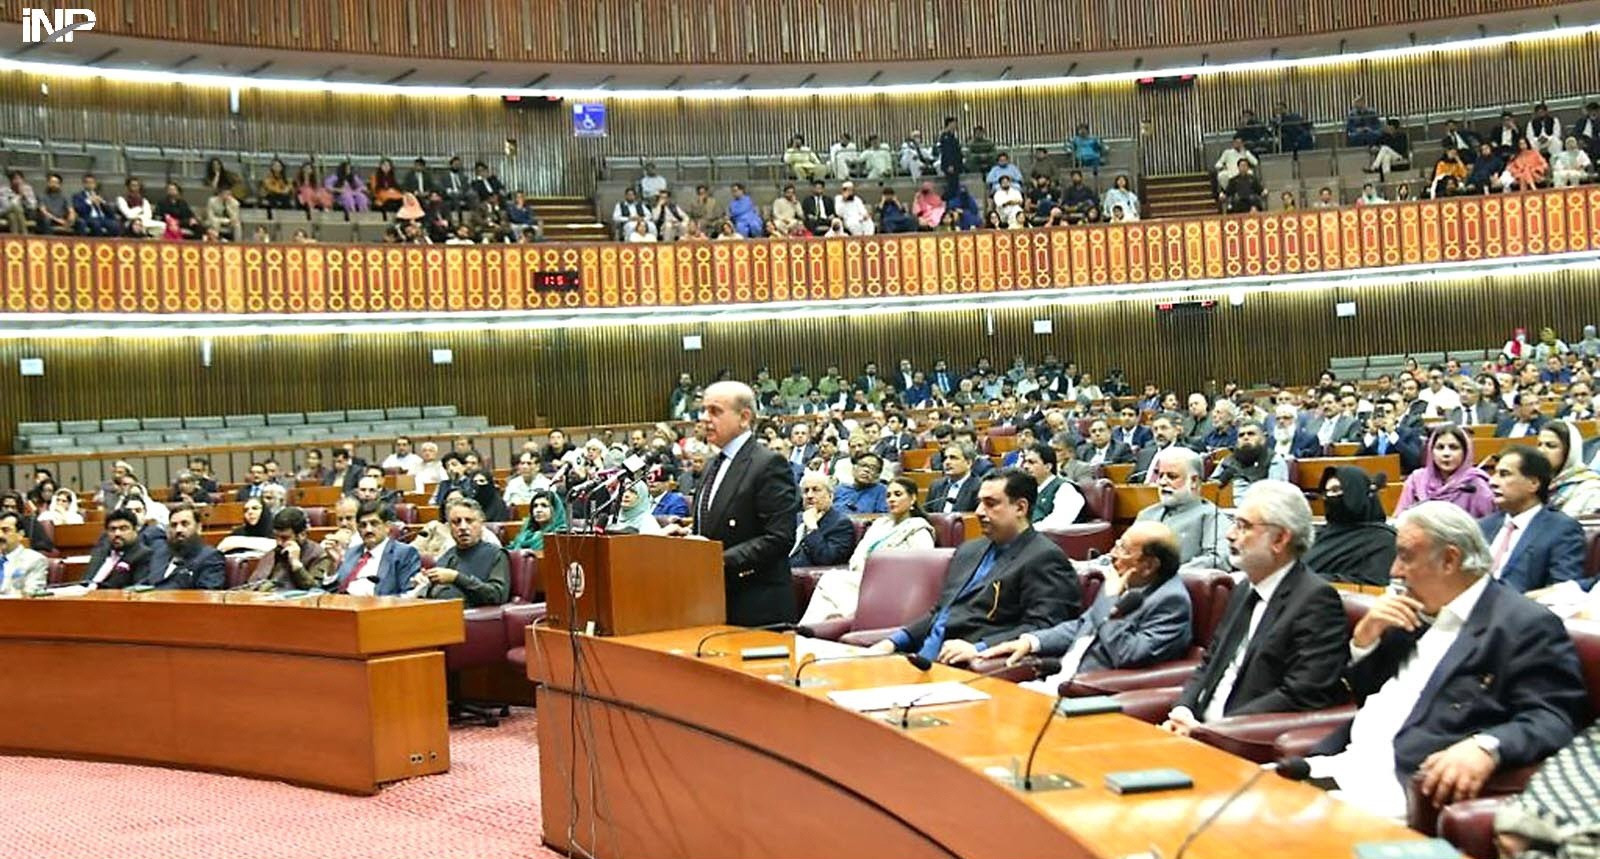 pm shehbaz sharif addresses the national constitution convention as supreme court justice qazi faez isa 2nd right in the front row looks on photo inp